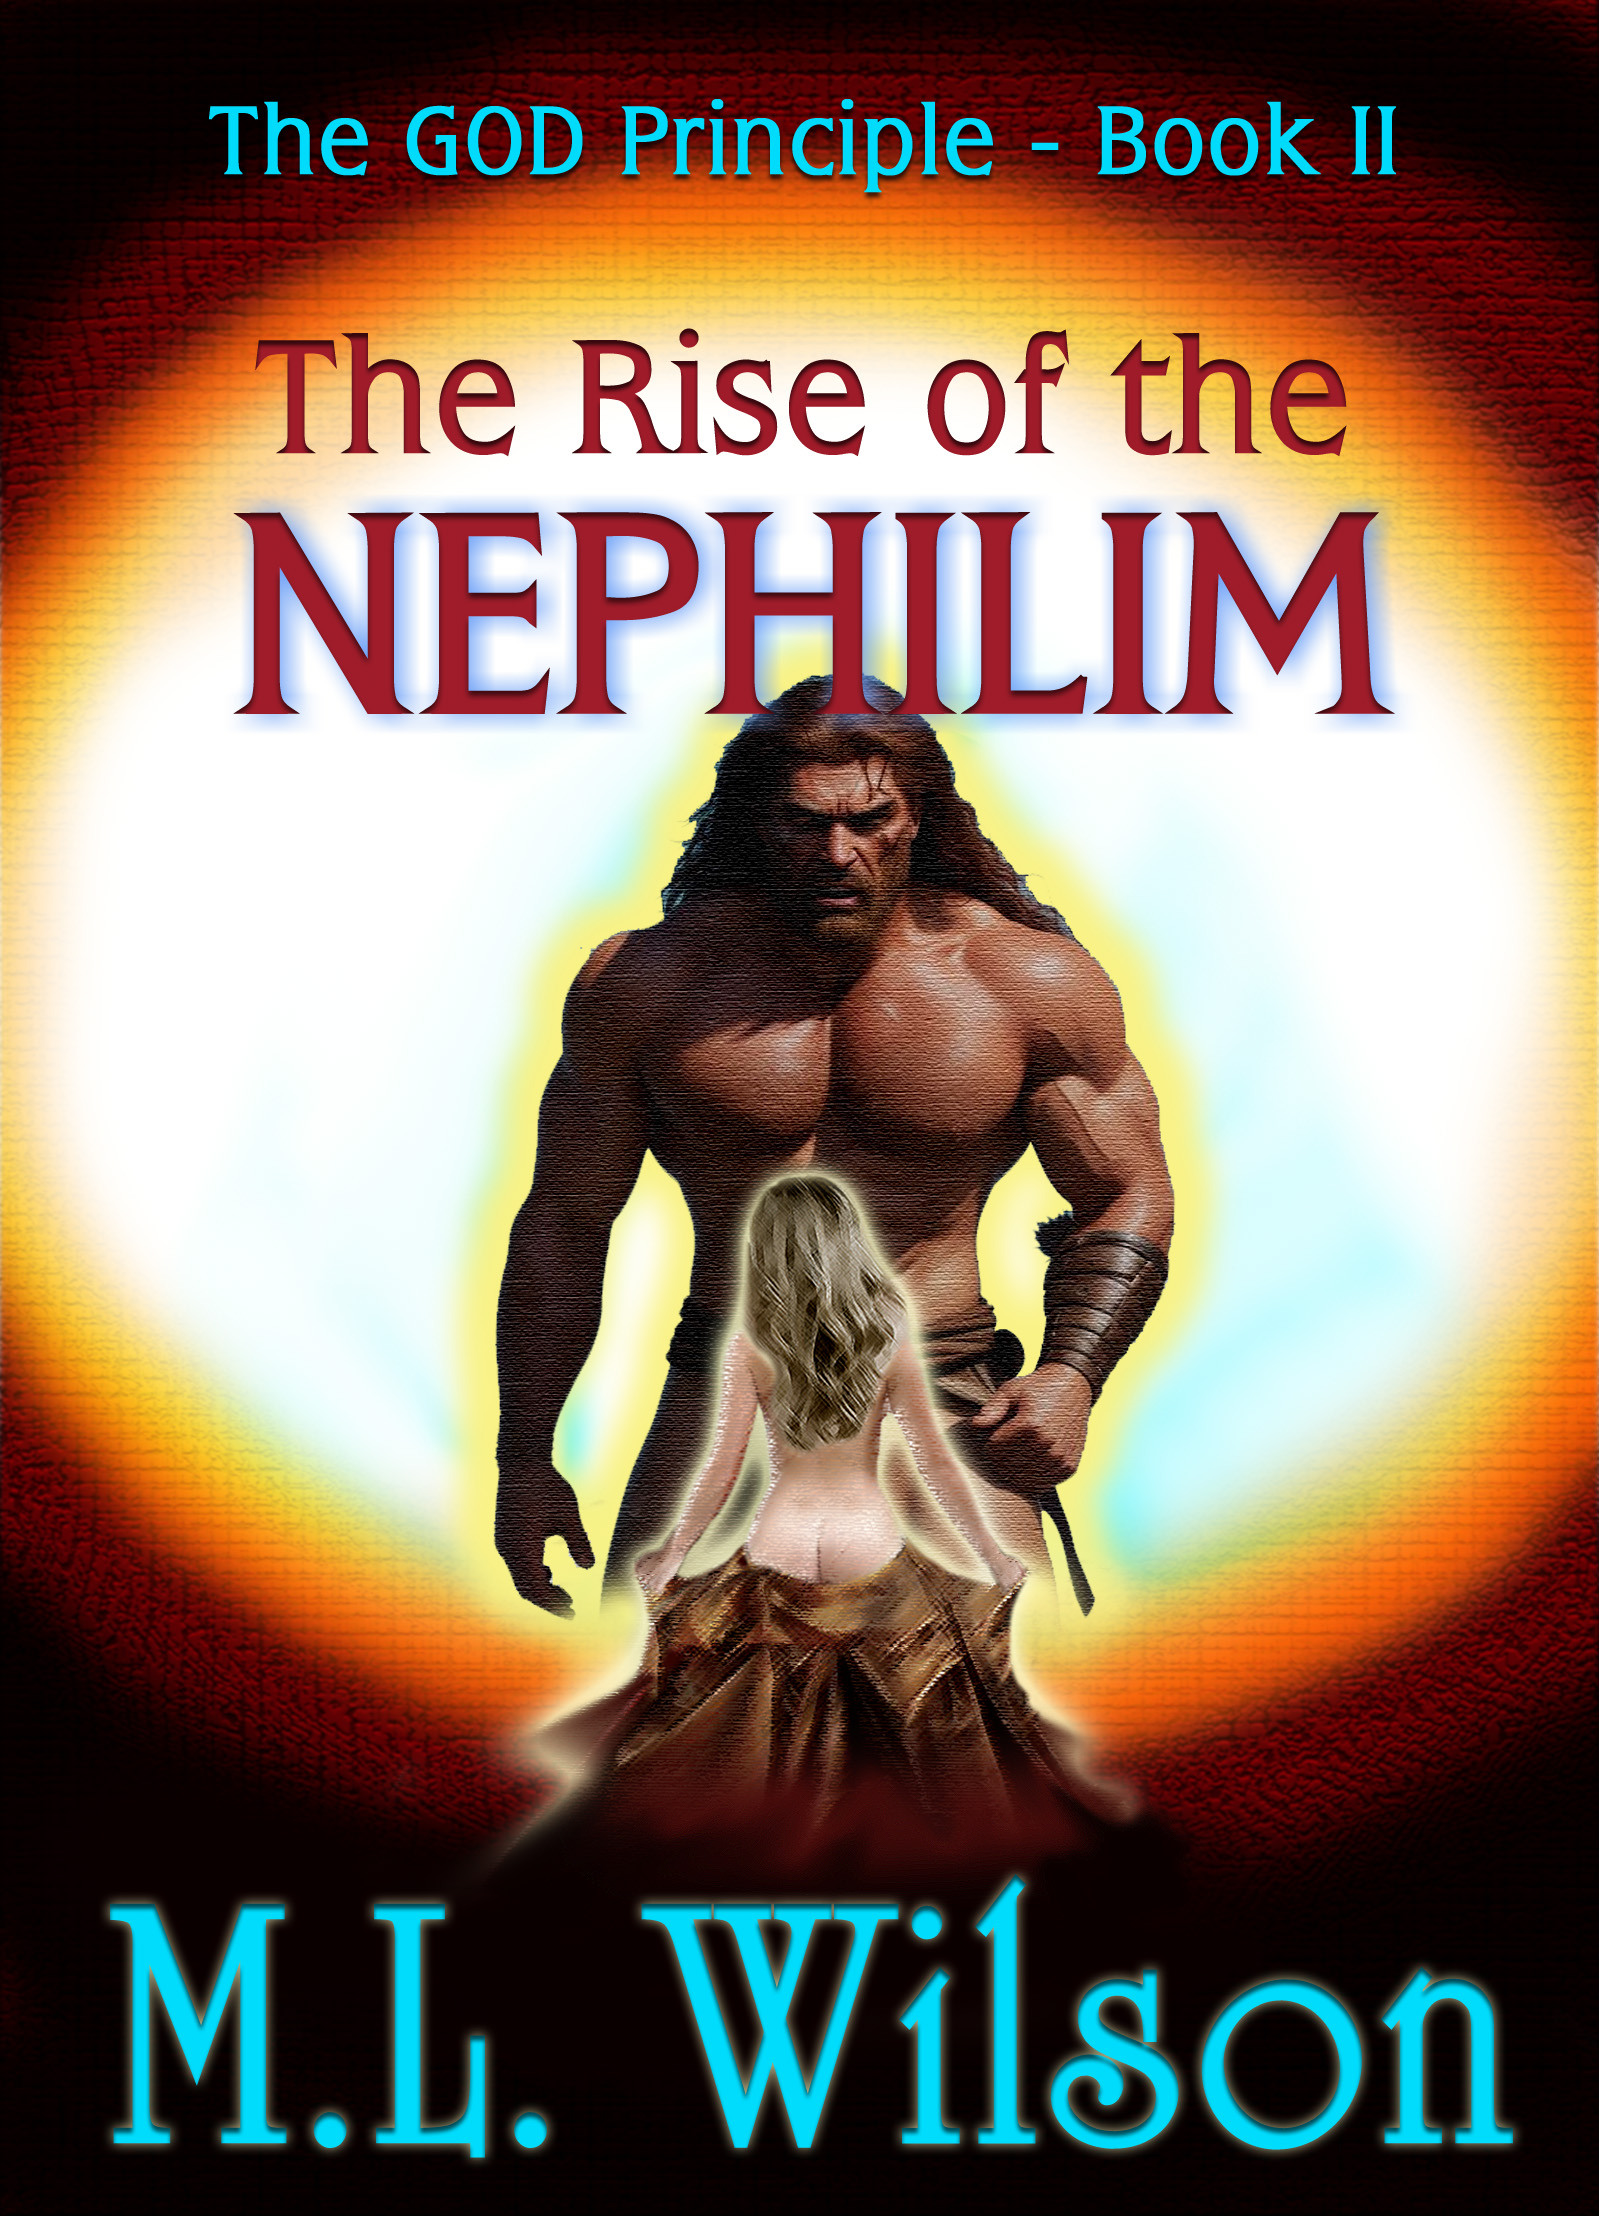 The Rise of the Nephilim.